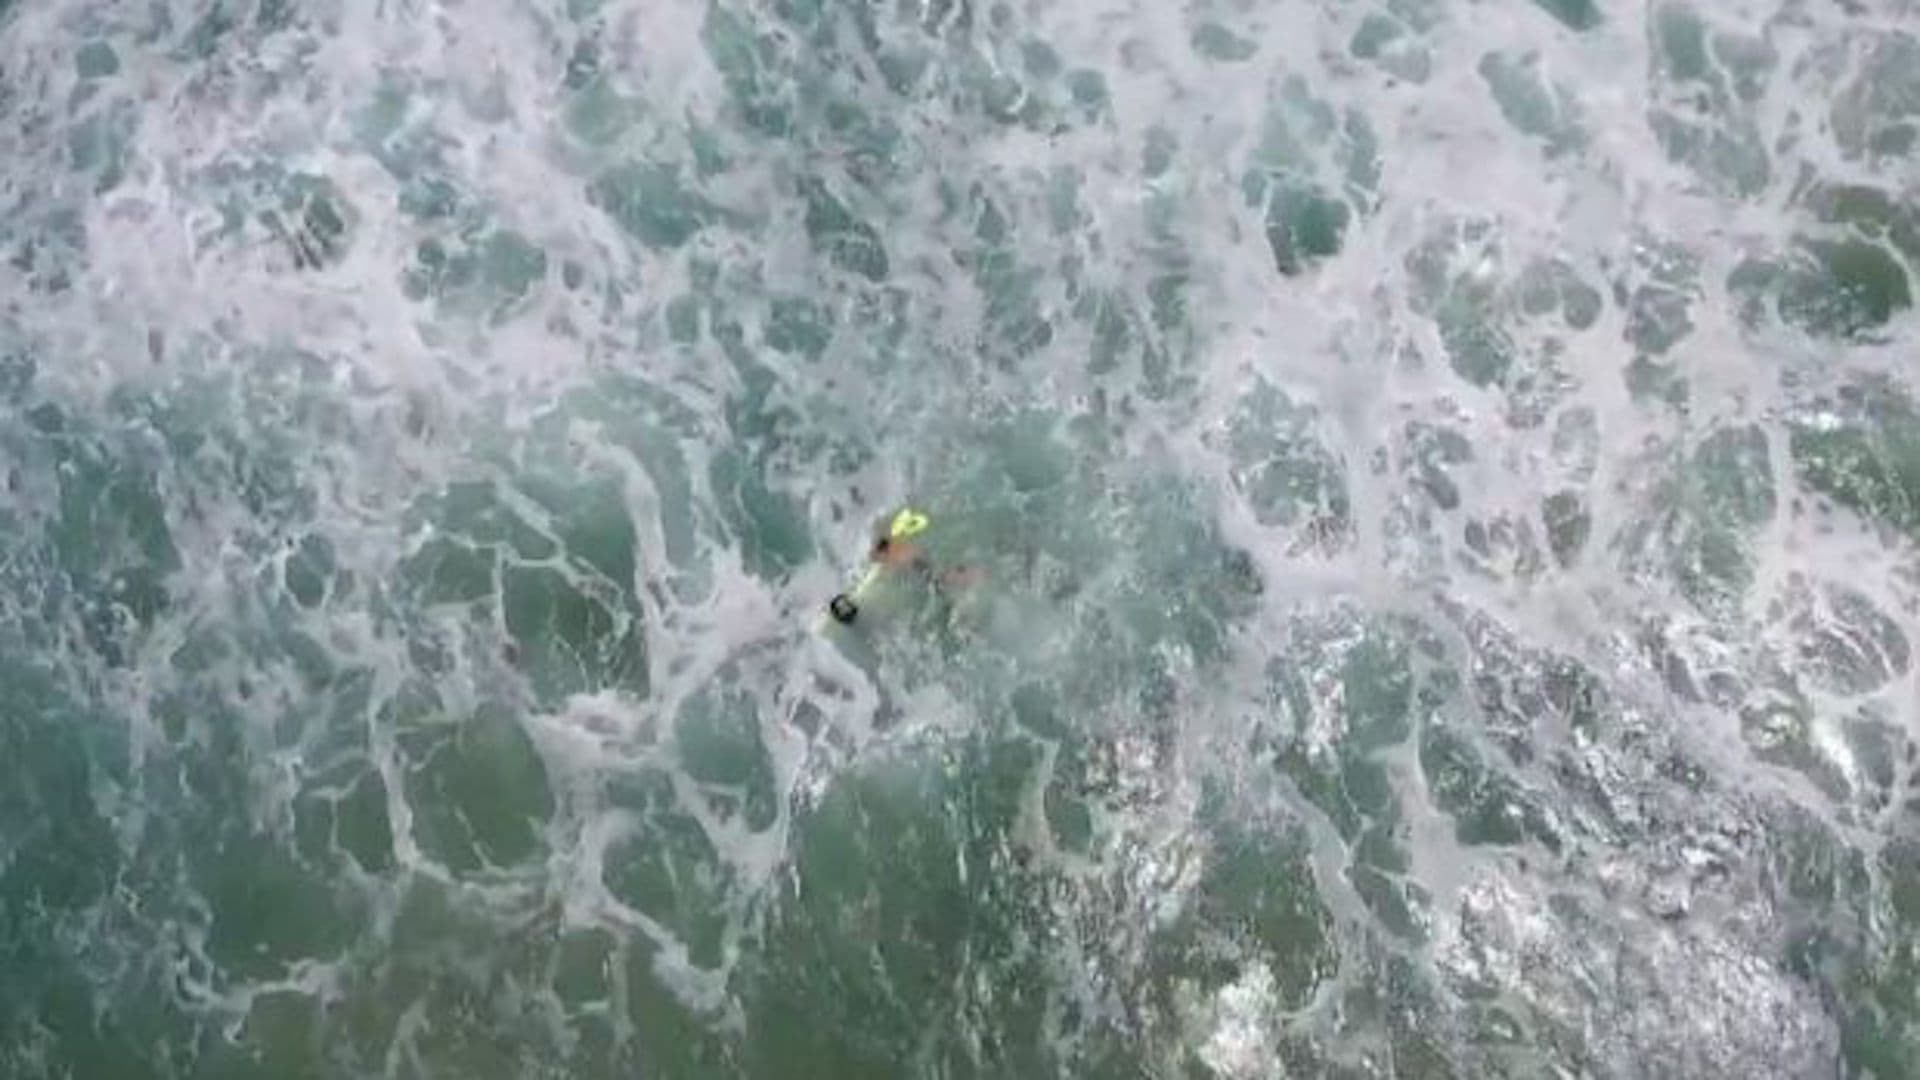 Drone Saved Two Australian Swimmers From Drowning